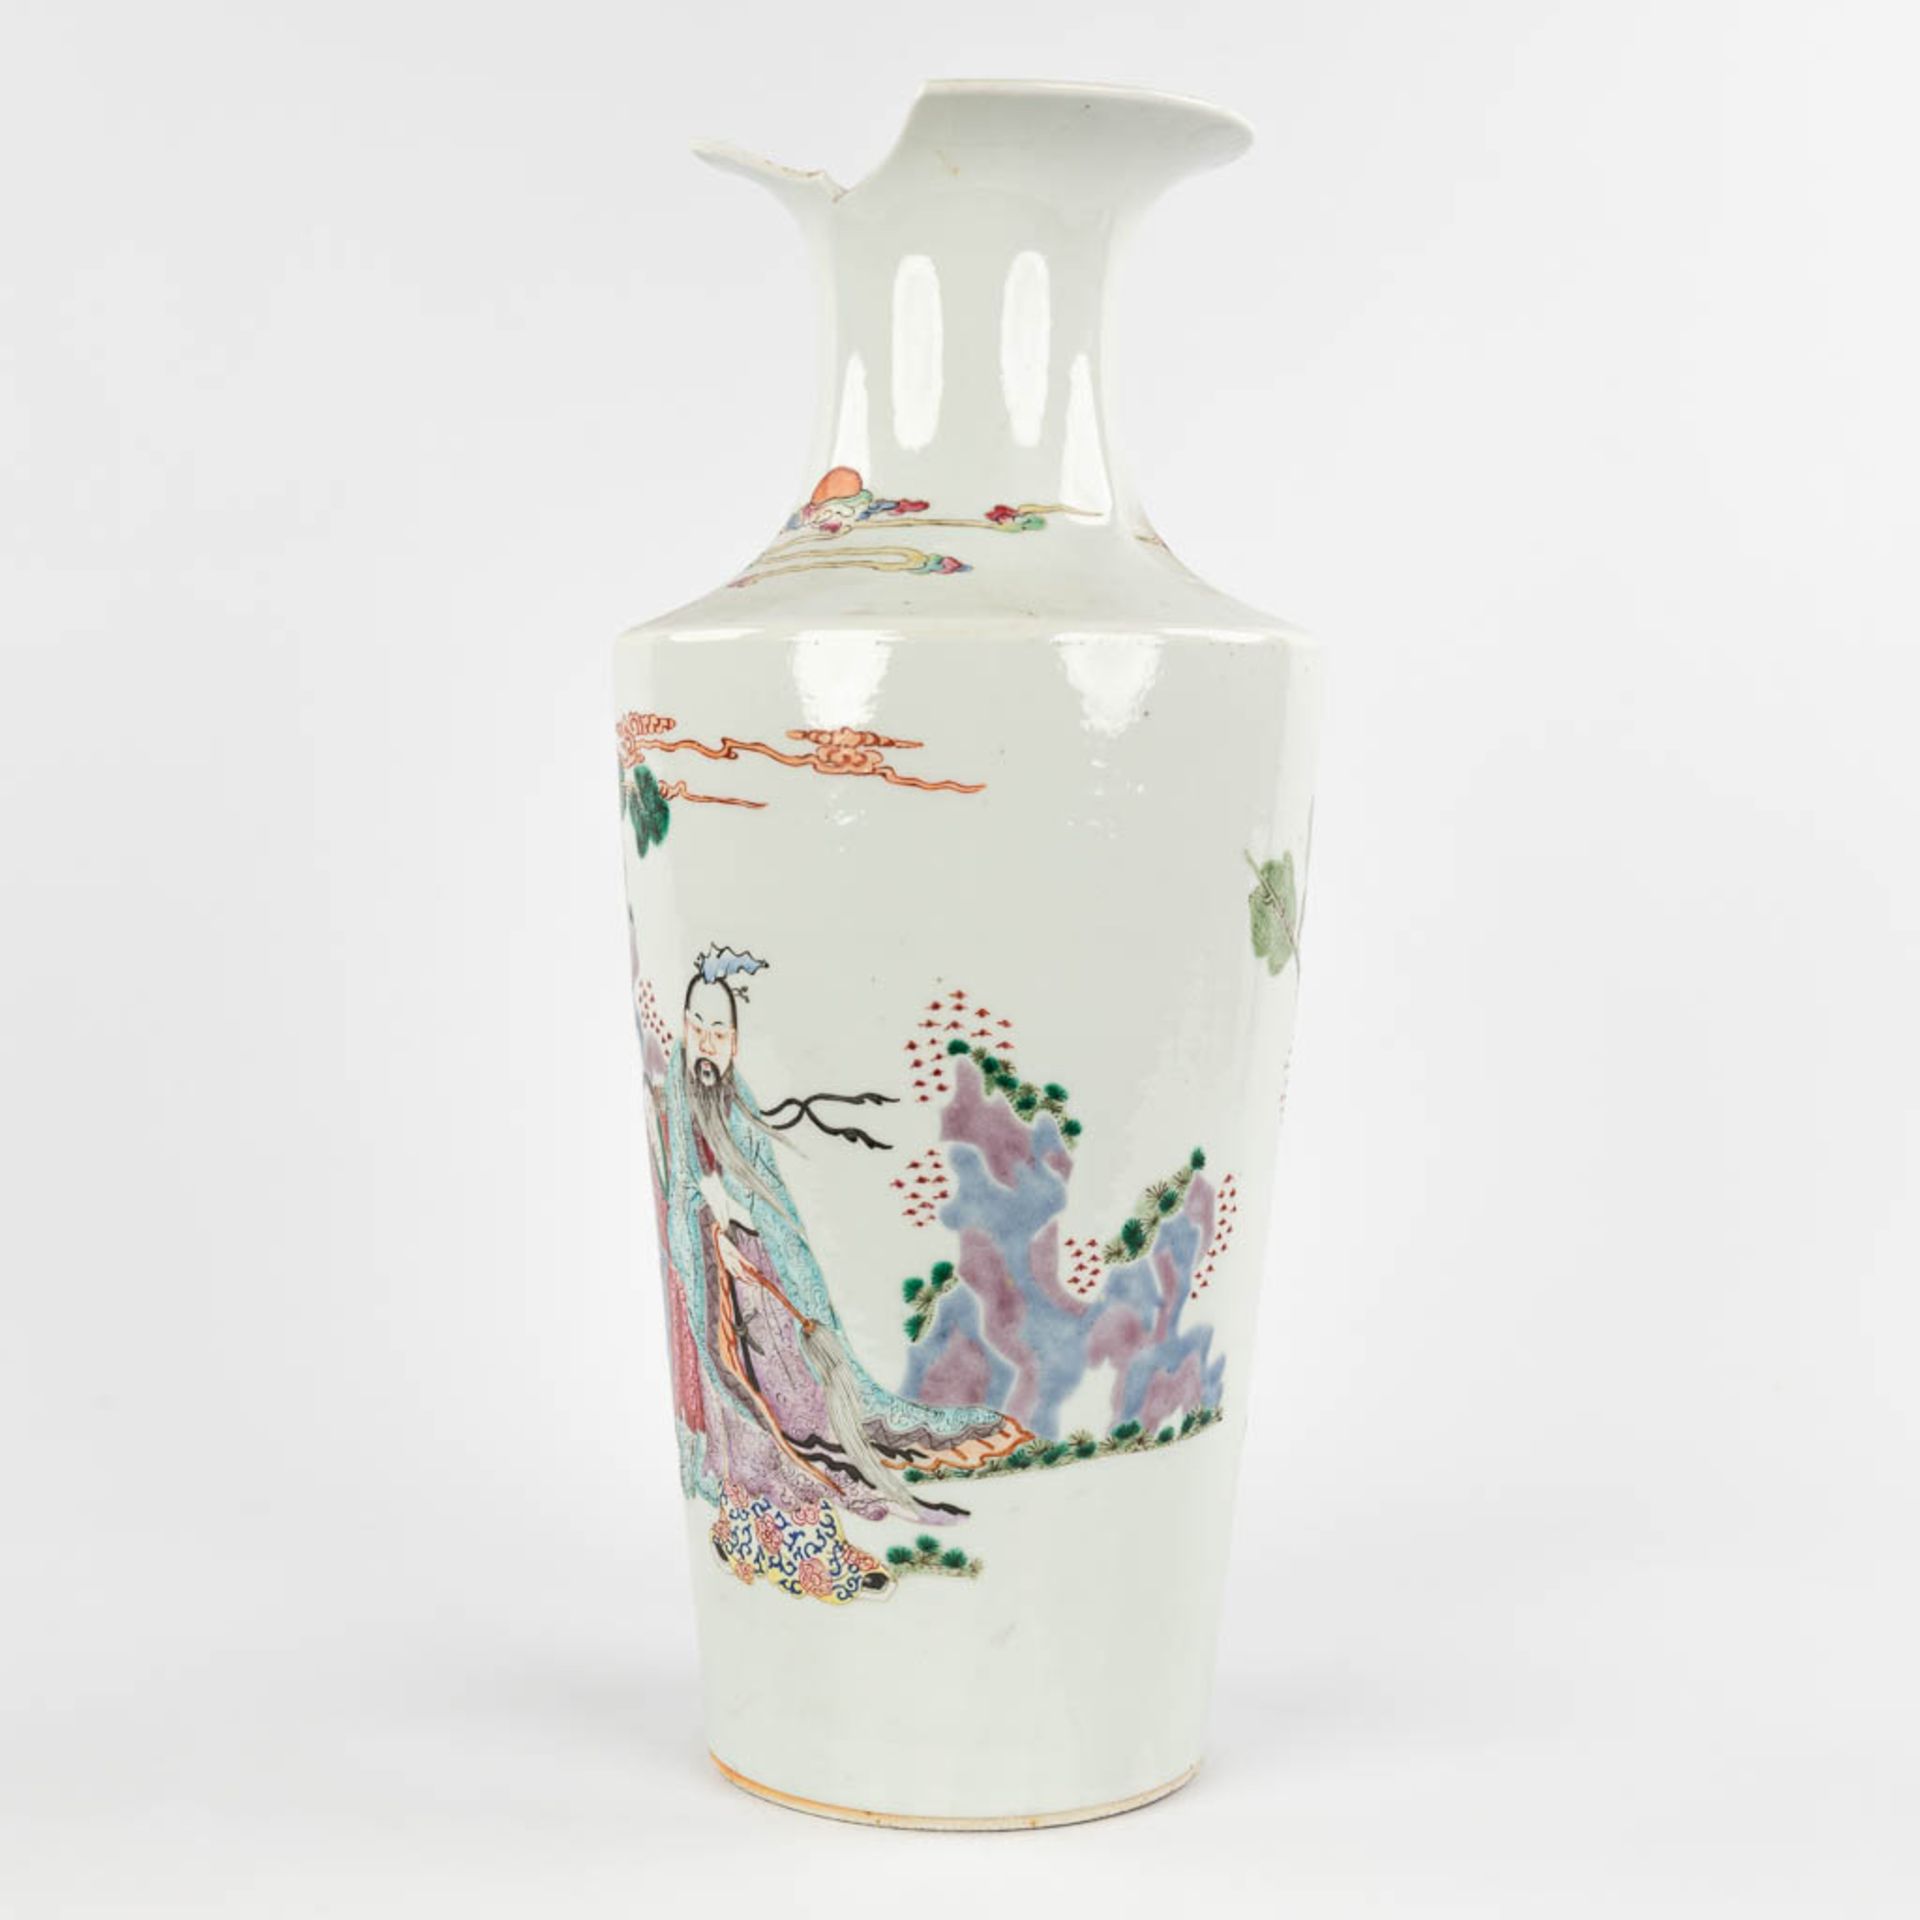 A Chinese vase, decorated with wise men or Immortals. 19th/20th C. (H:44 x D:19 cm) - Image 7 of 12